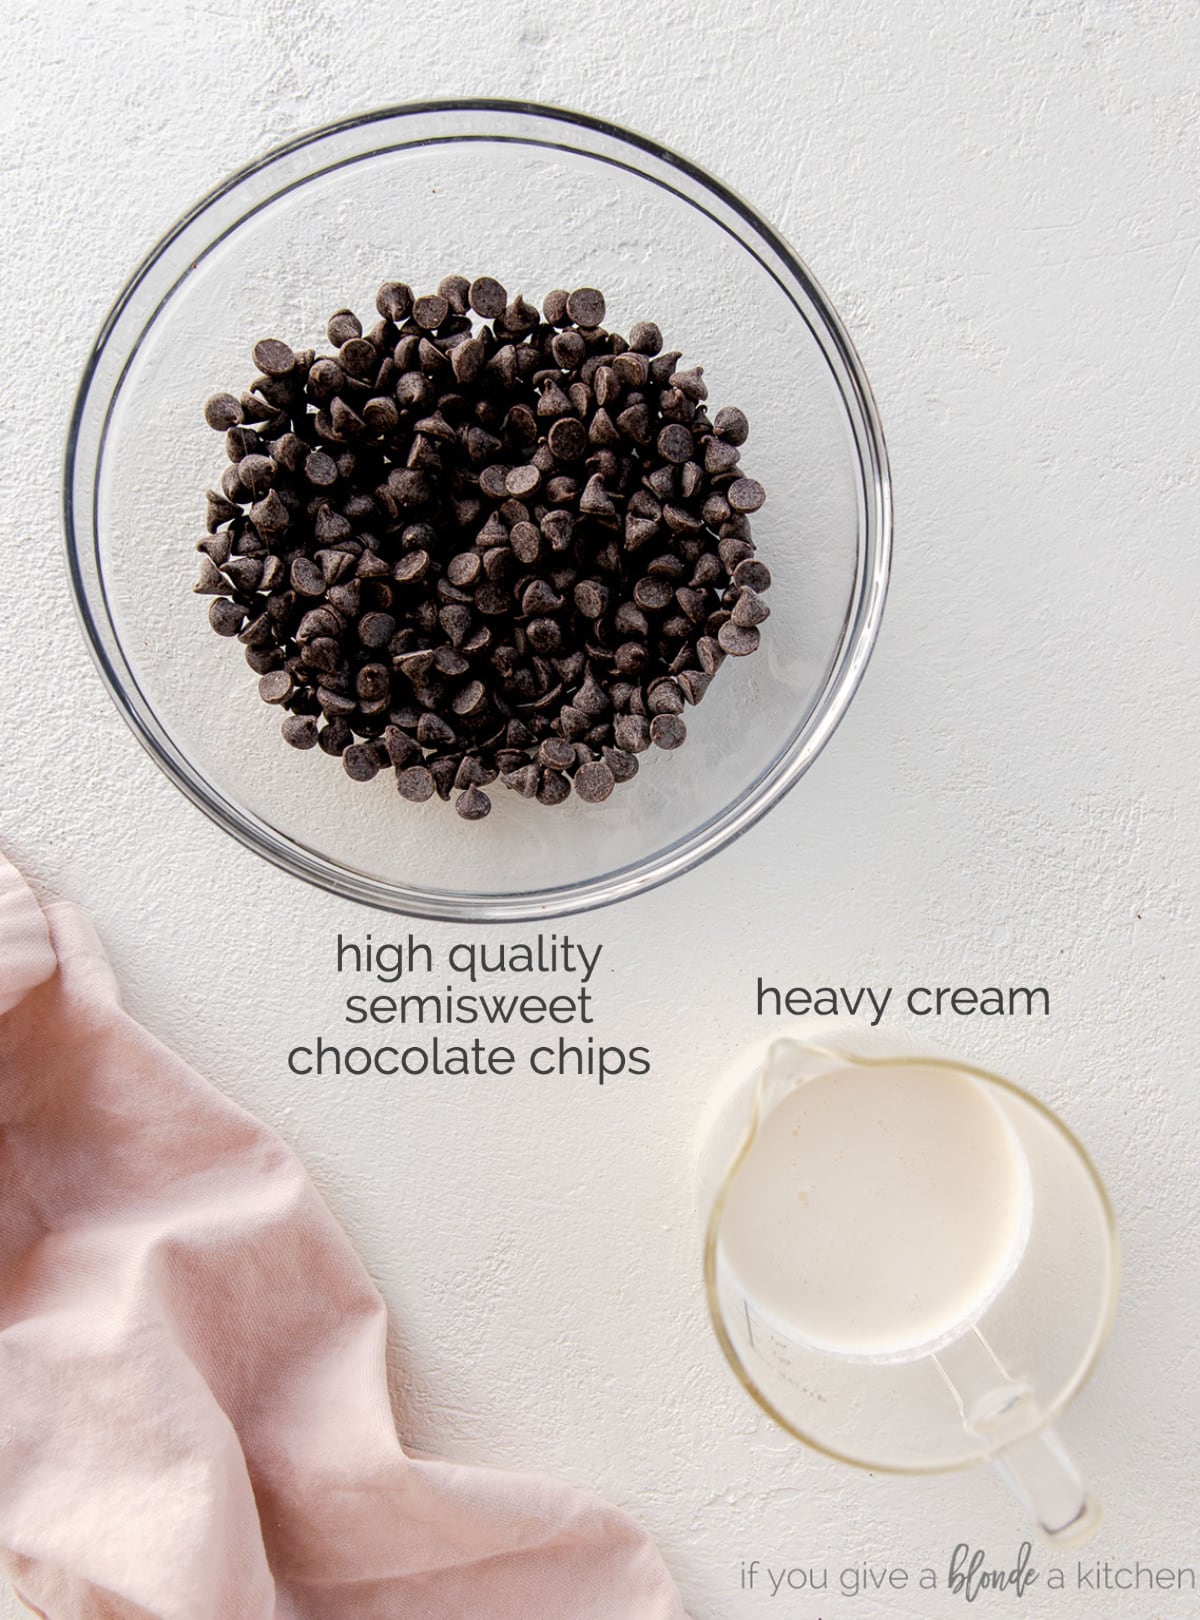 chocolate ganache ingredients: bowl of chocolate chips and glass pitcher of heavy cream